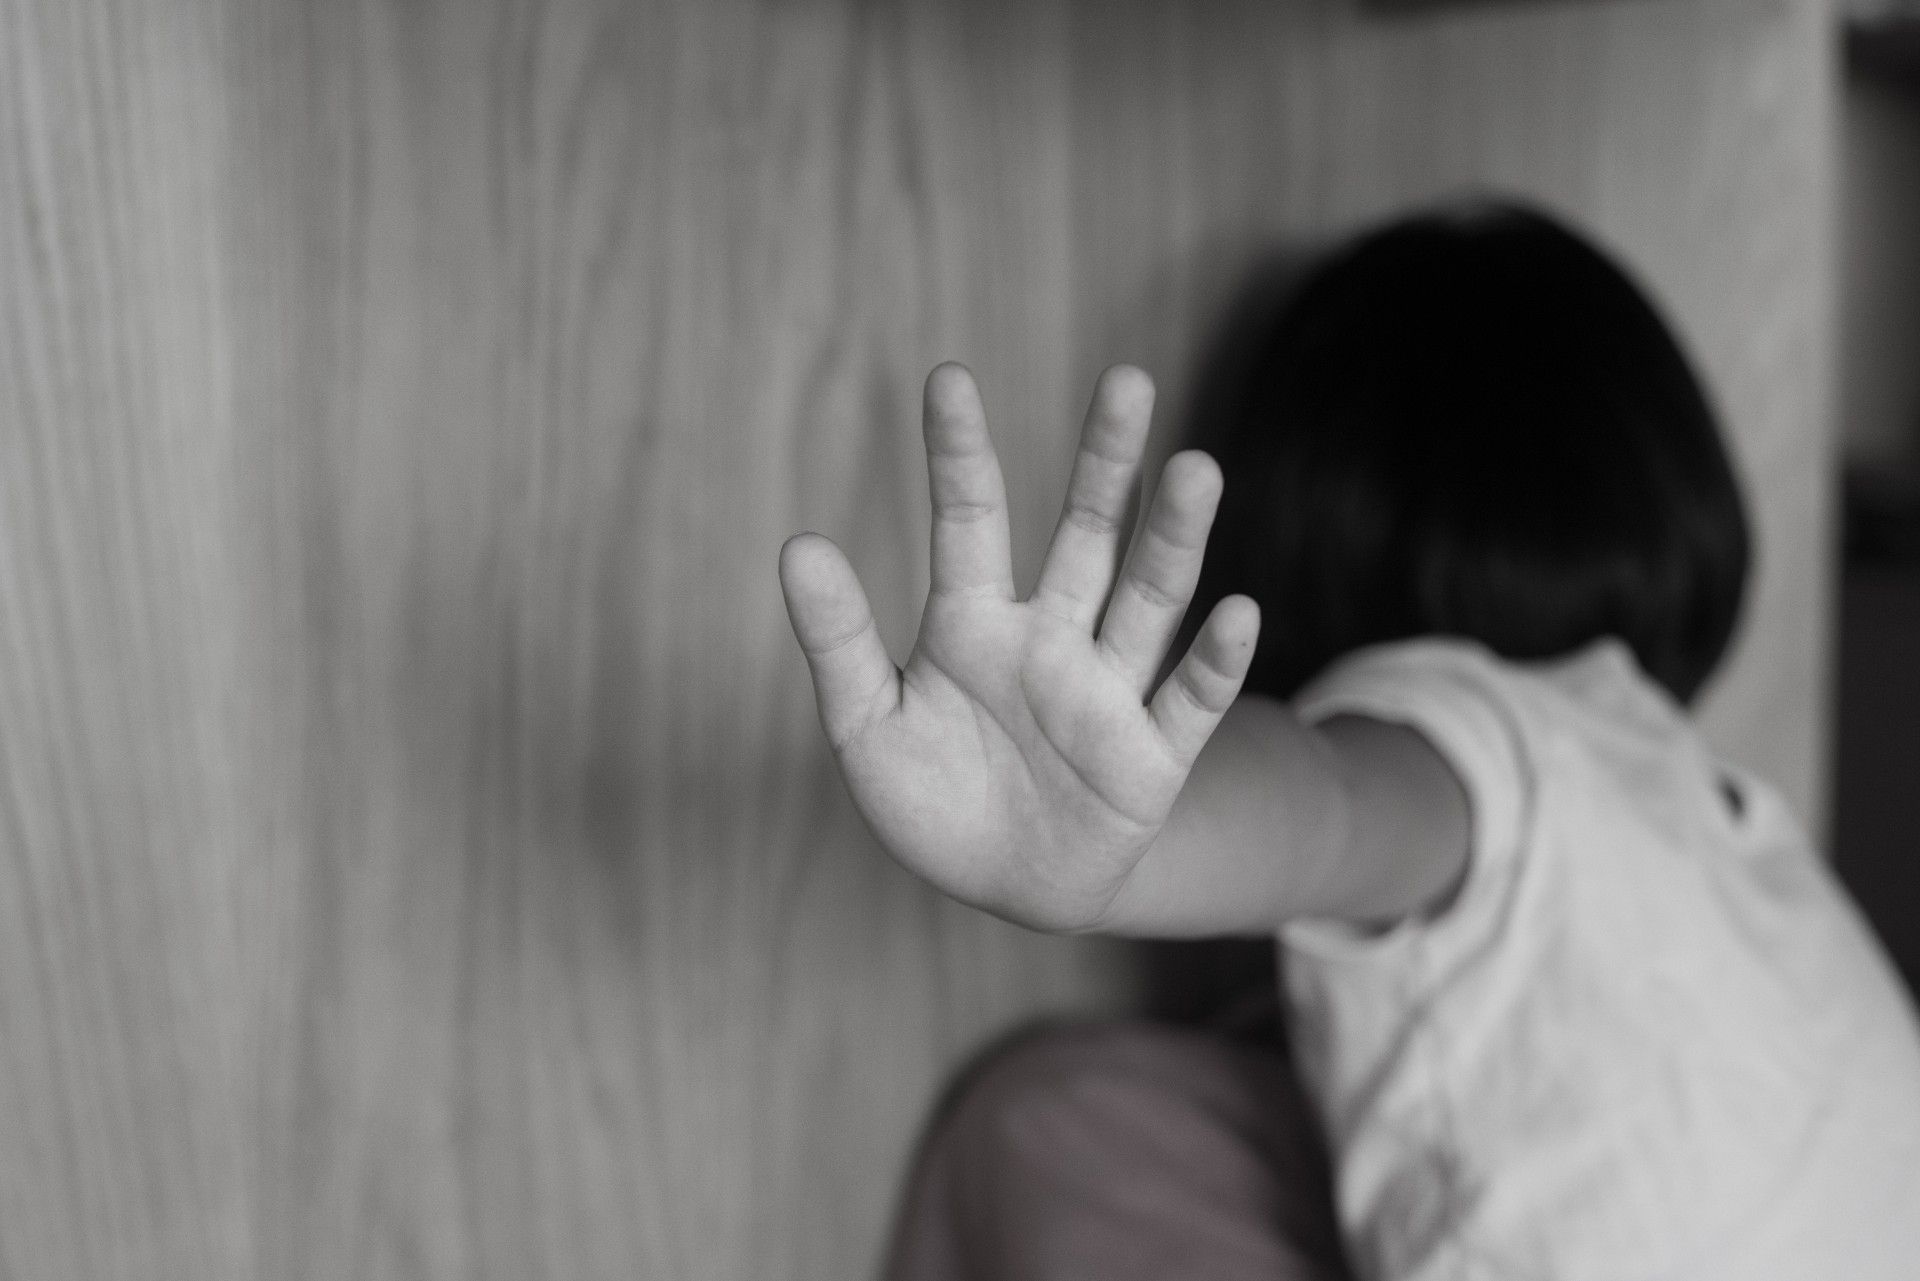 Desaturated photo of a child holding their hand up and turning away from the camera - Boys & Girls Club sexual abuse